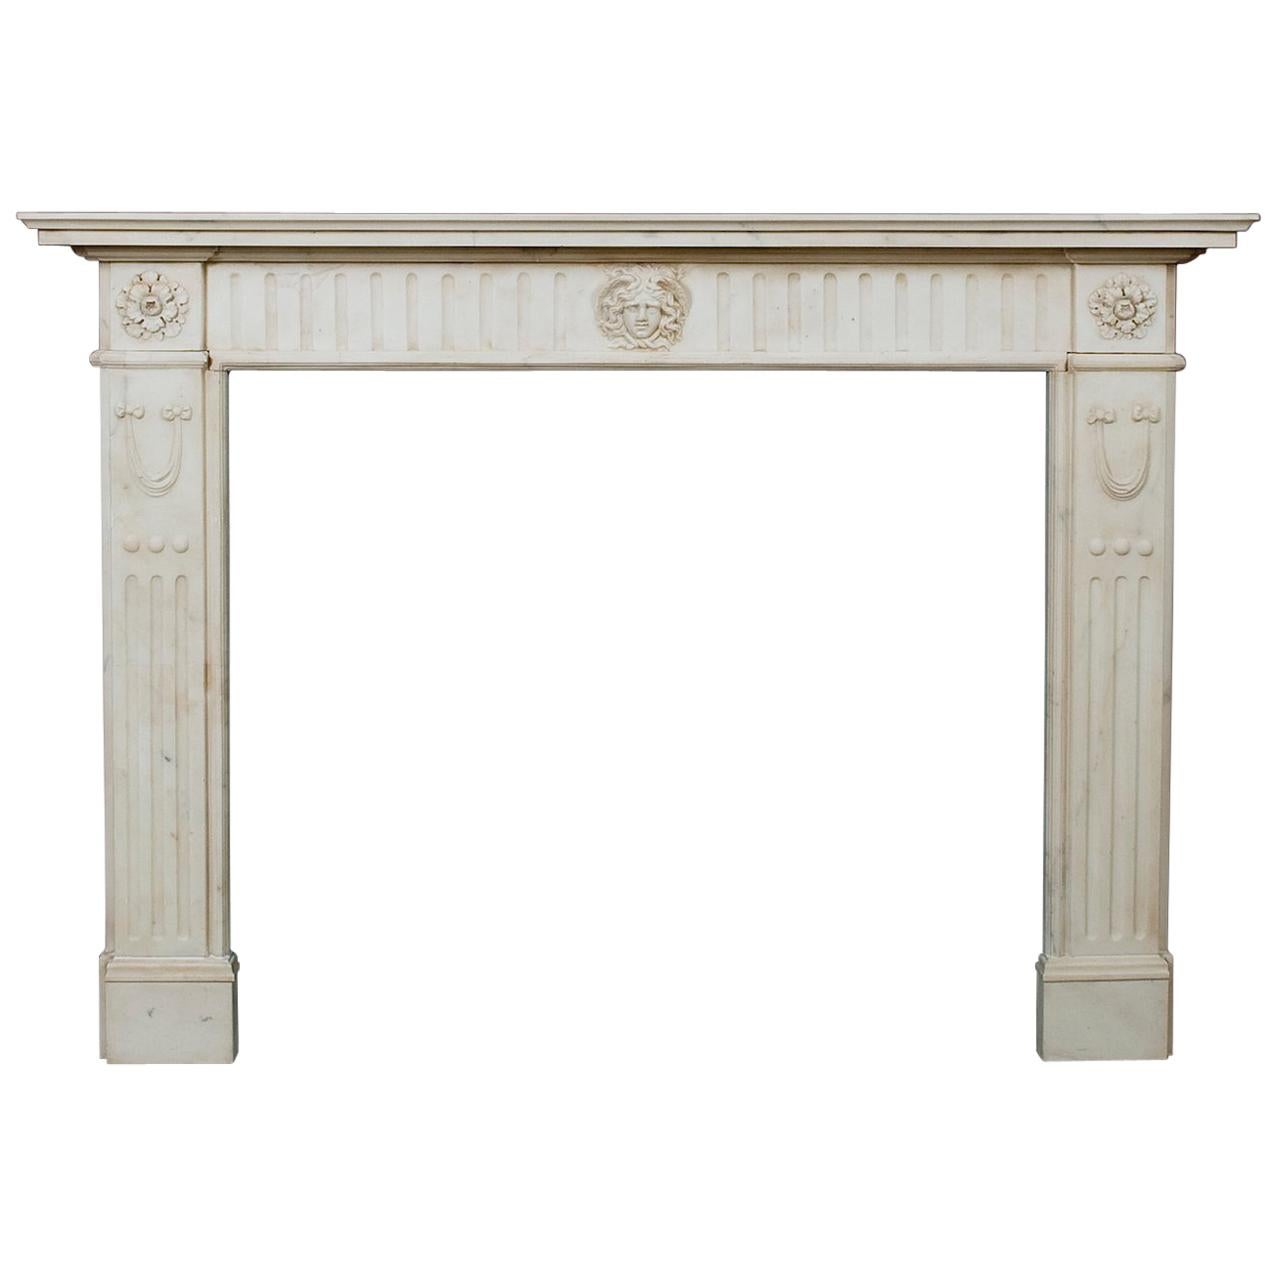 19th Century English Statuary Marble Fireplace Mantel For Sale